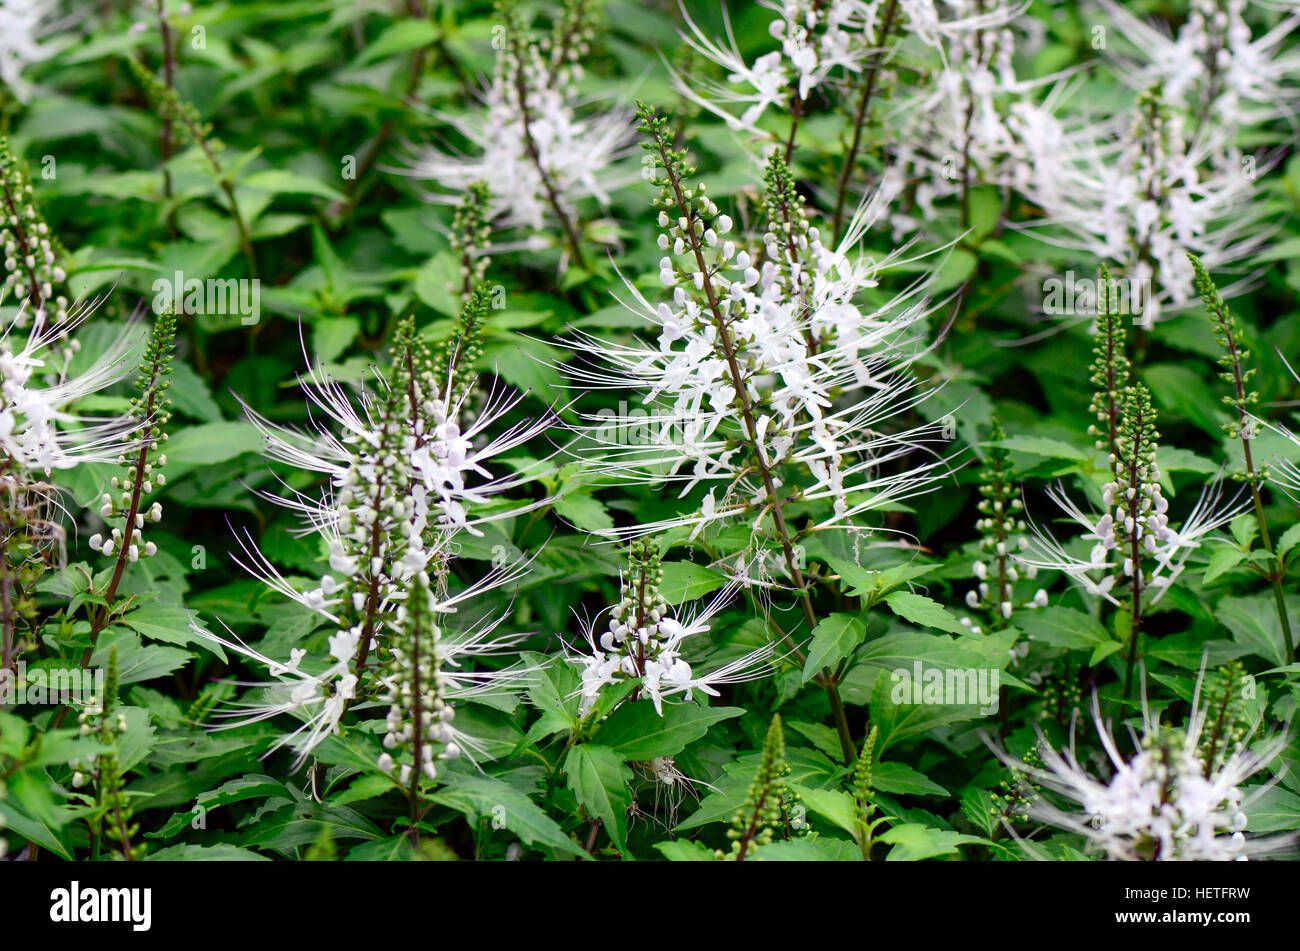 Java tea, Kidney tea plant or Cat’s whiskers (Orthosiphon aristatus (Blume) Miq. ) is a popular herbal remedy in southeast Asia. Stock Photo